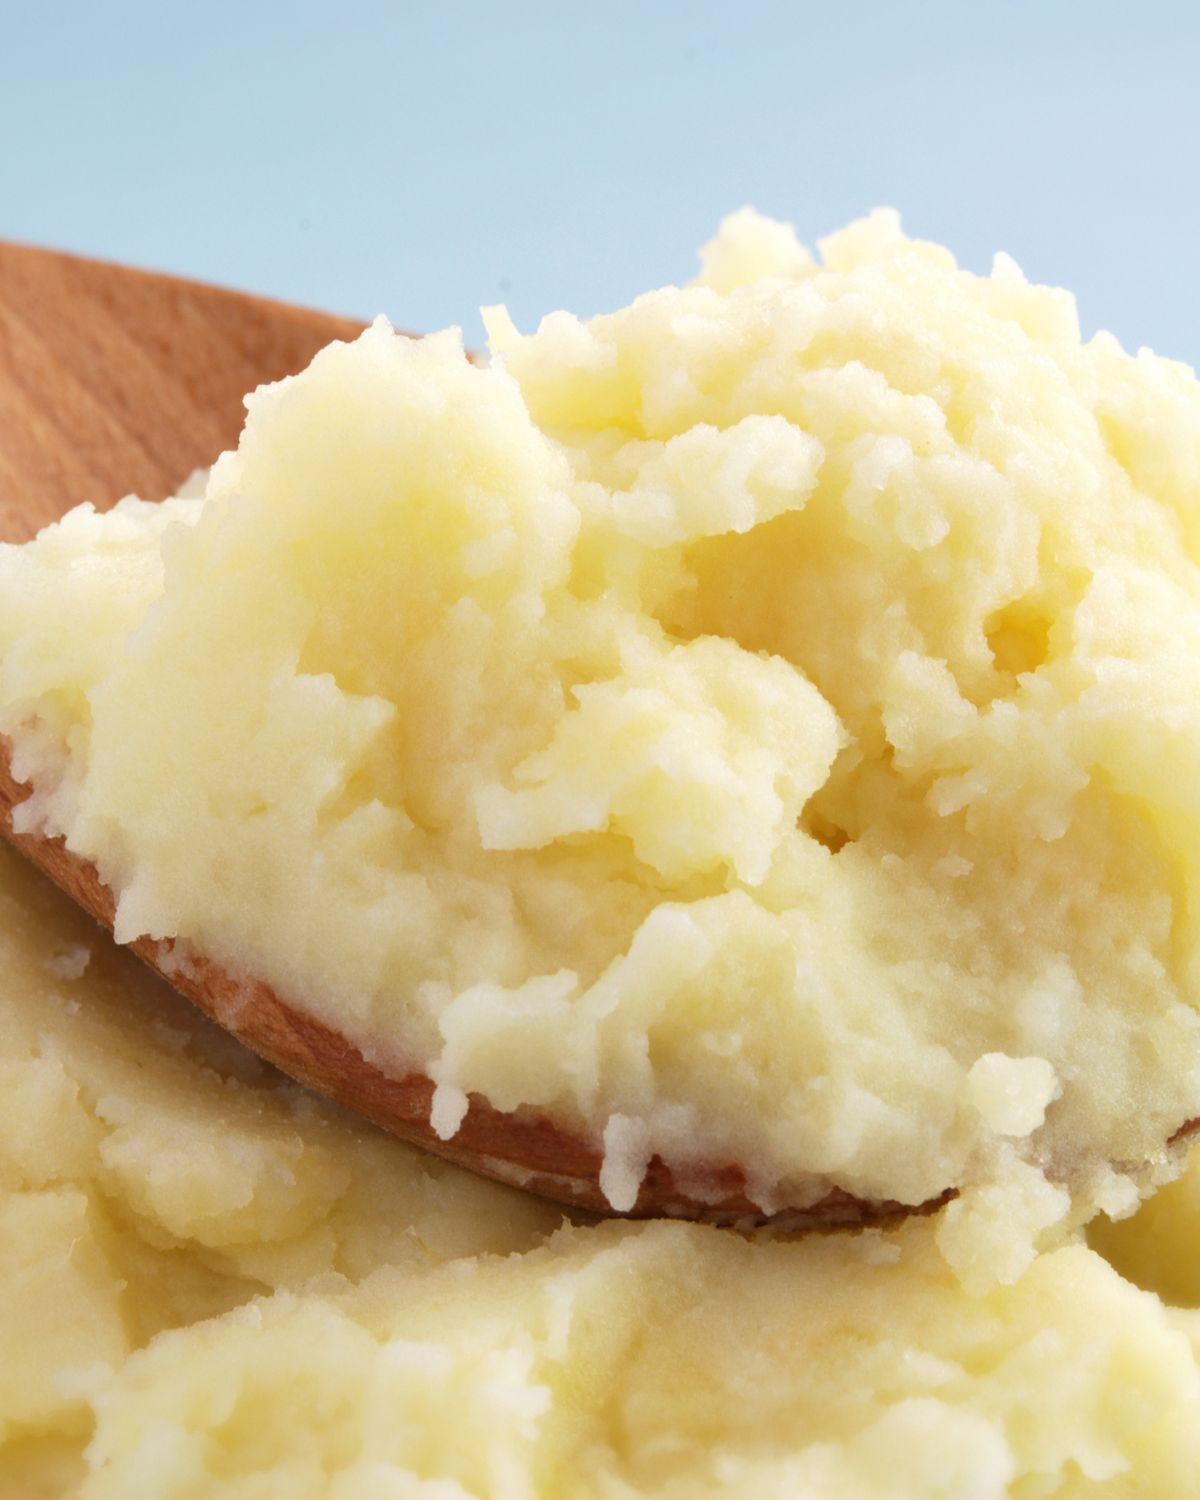 A spoonful of the mashed potatoes.